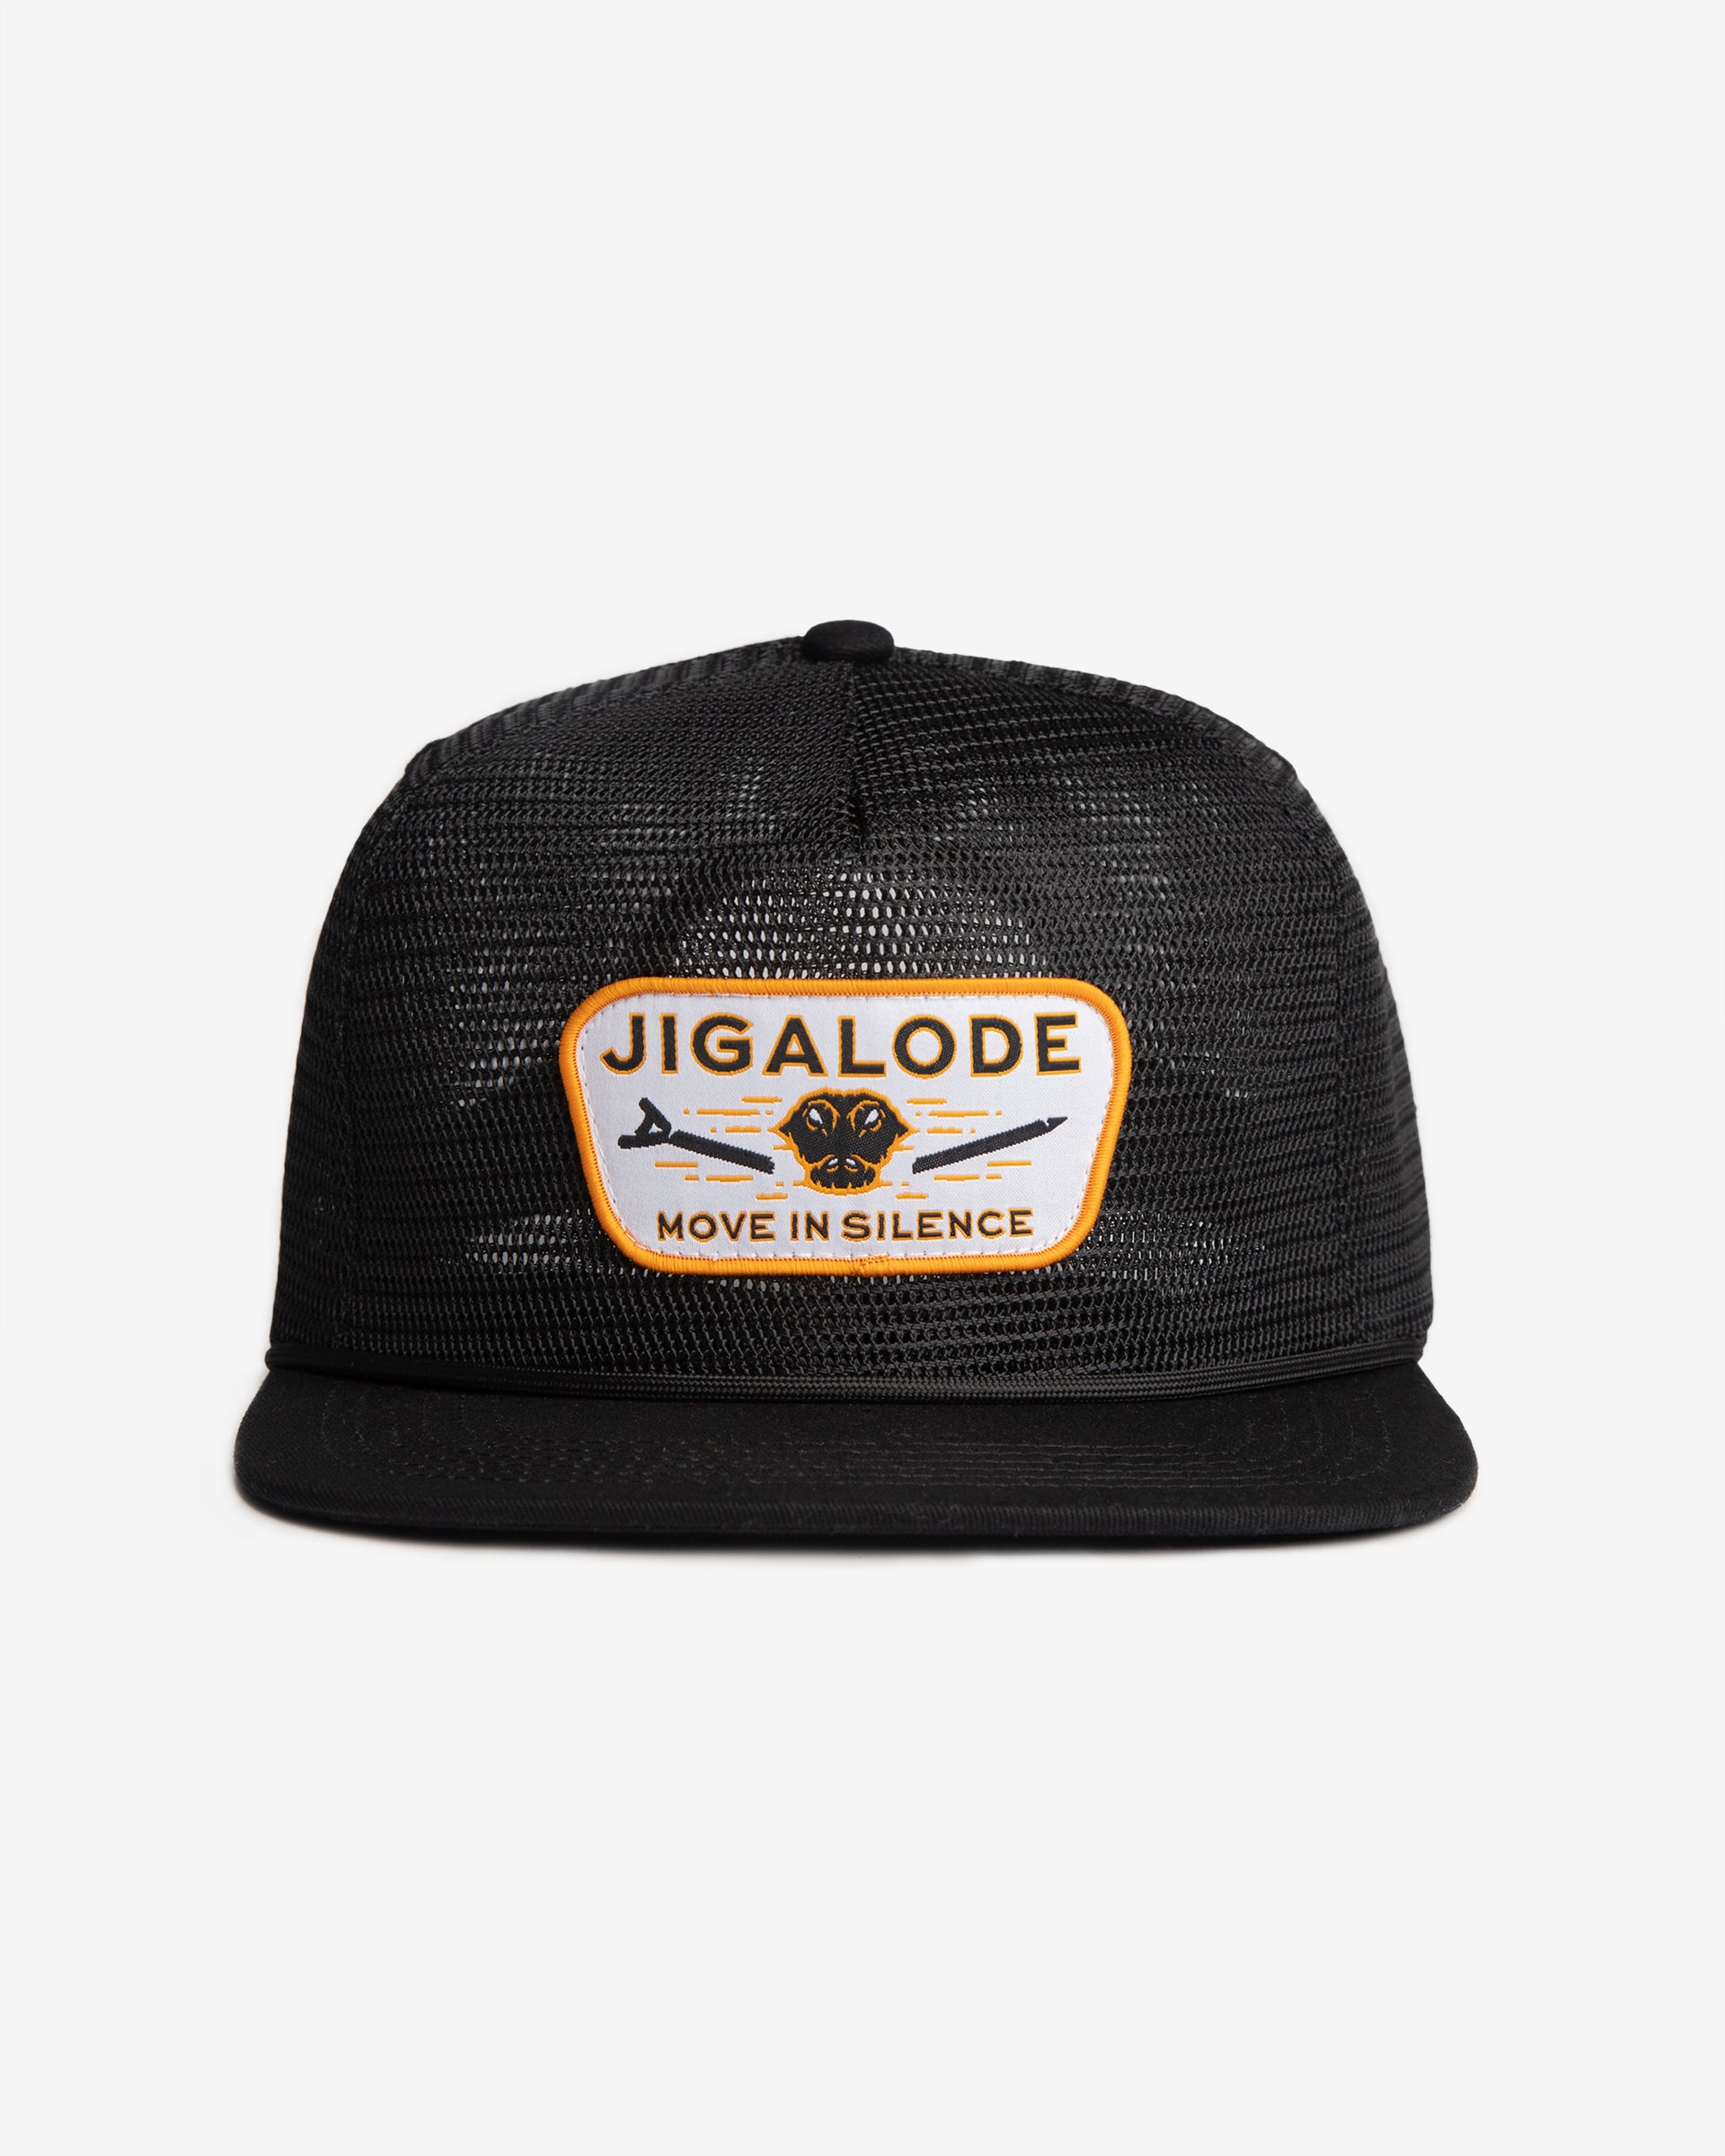 Move in Silence Mesh Snapback Hat | Jigalode Fishing Hats